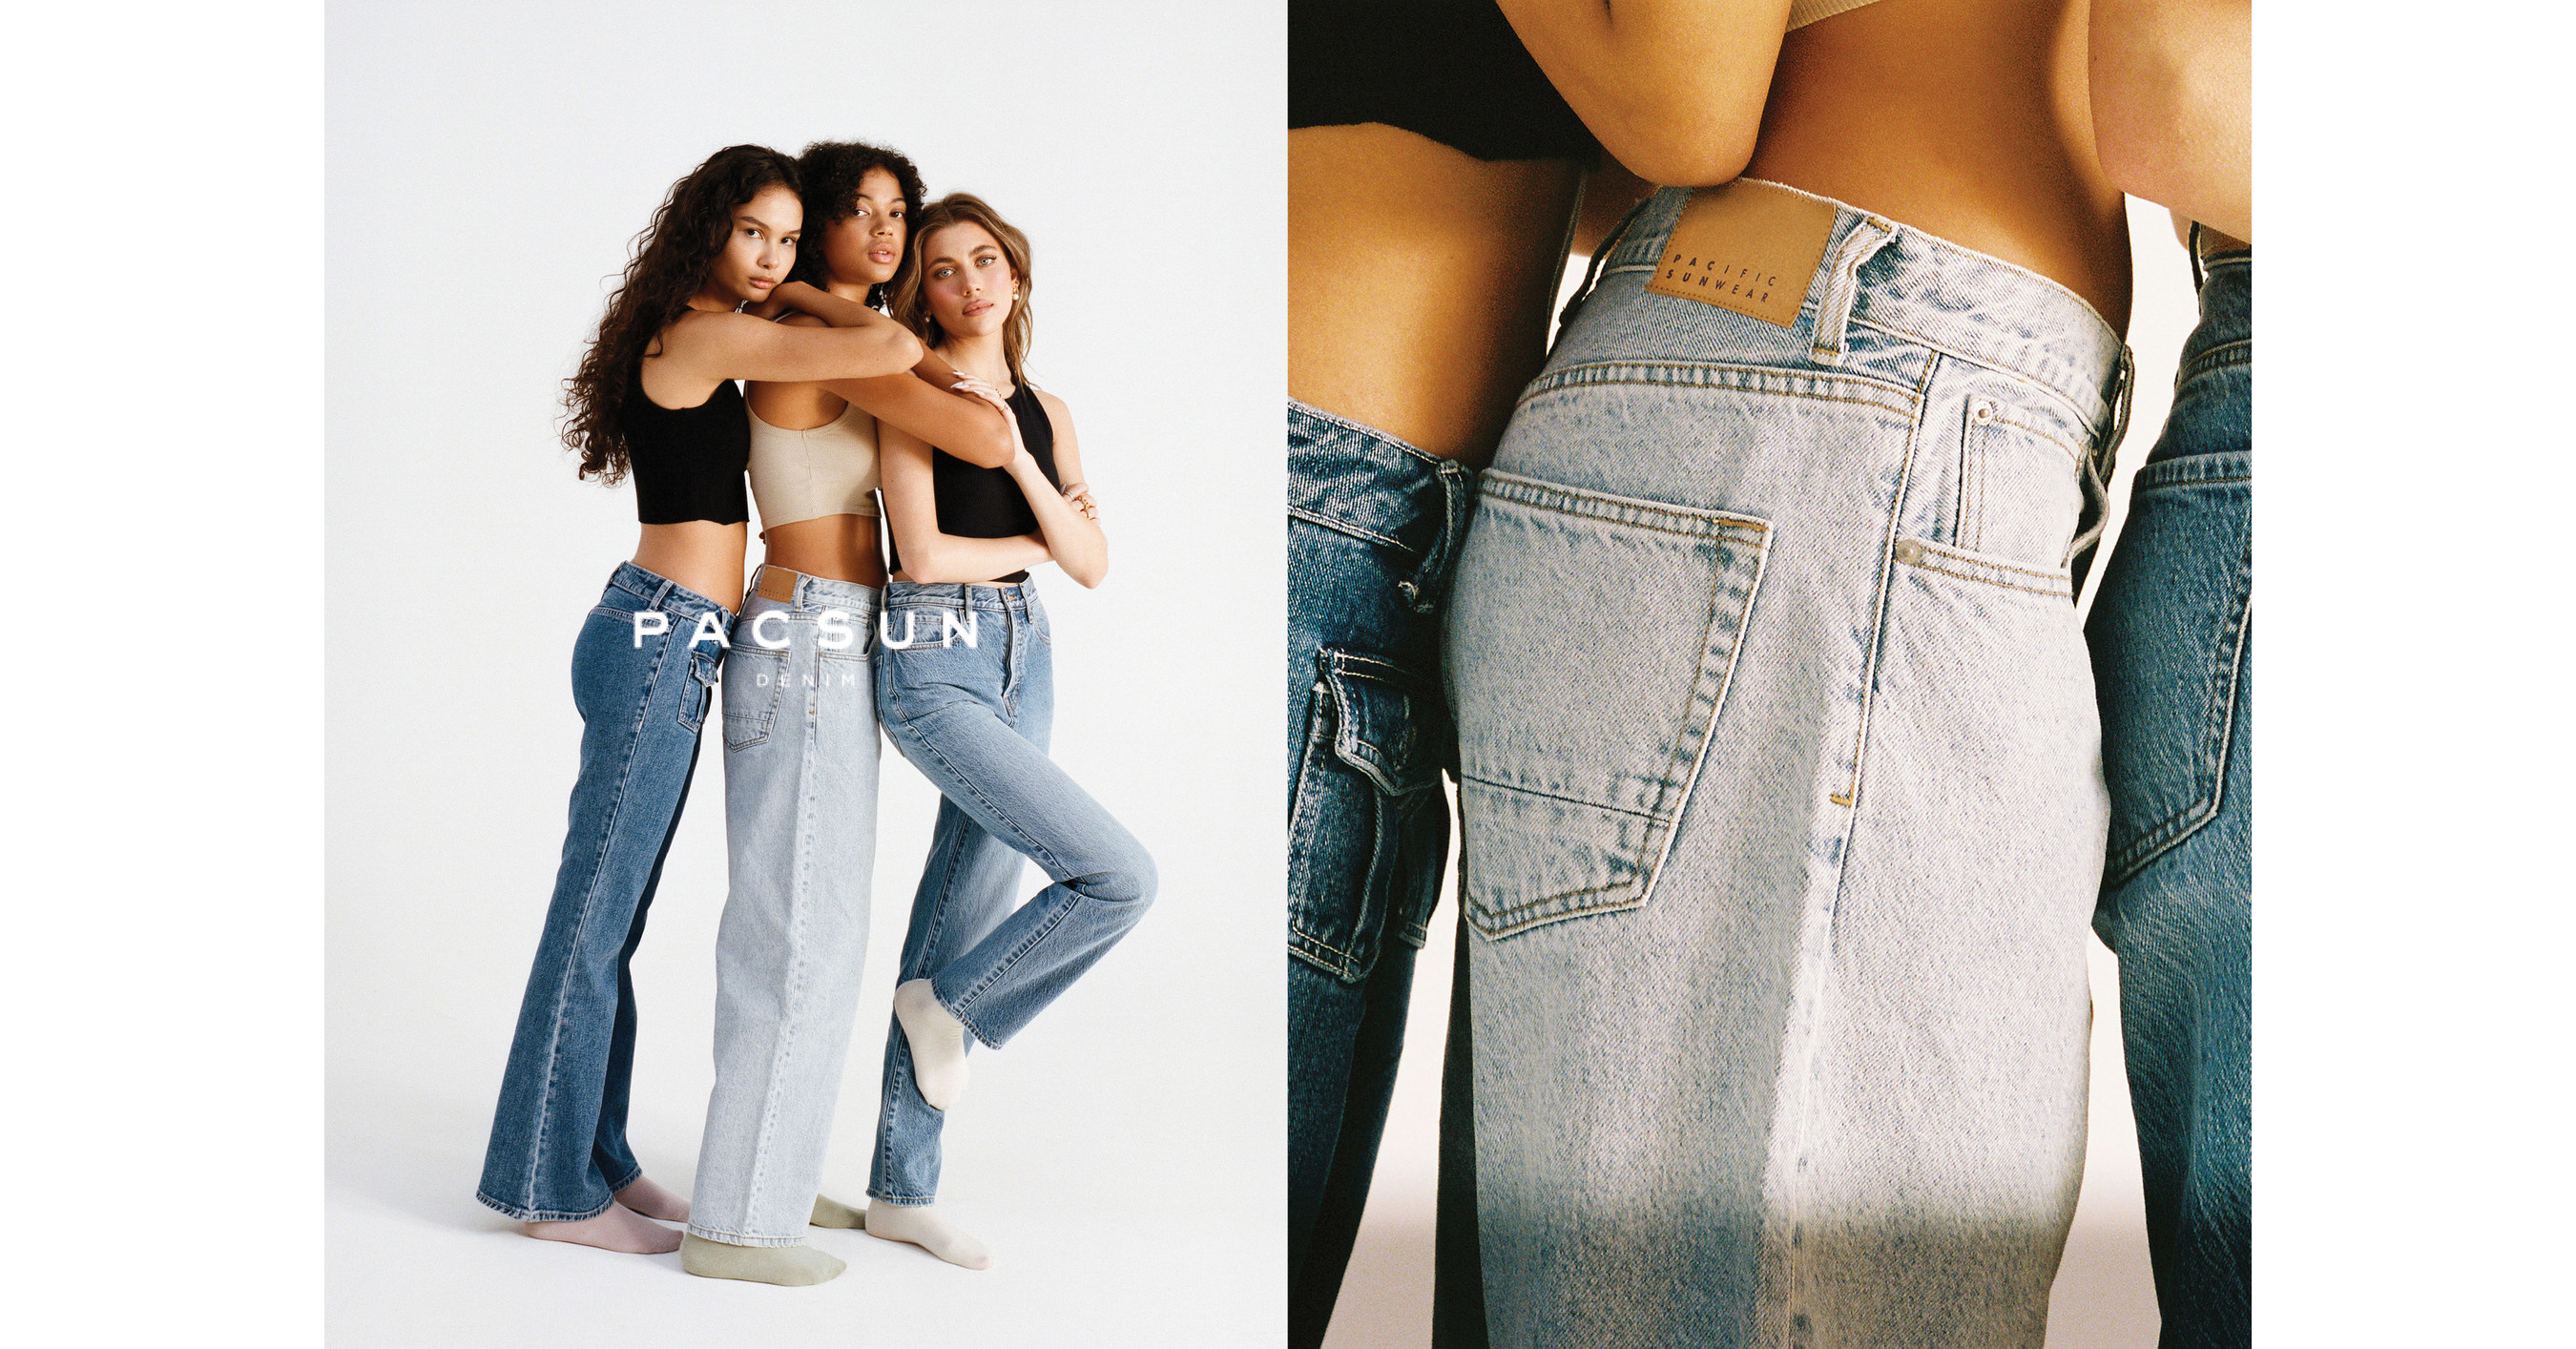 pacsun denim review🦋, Gallery posted by peach